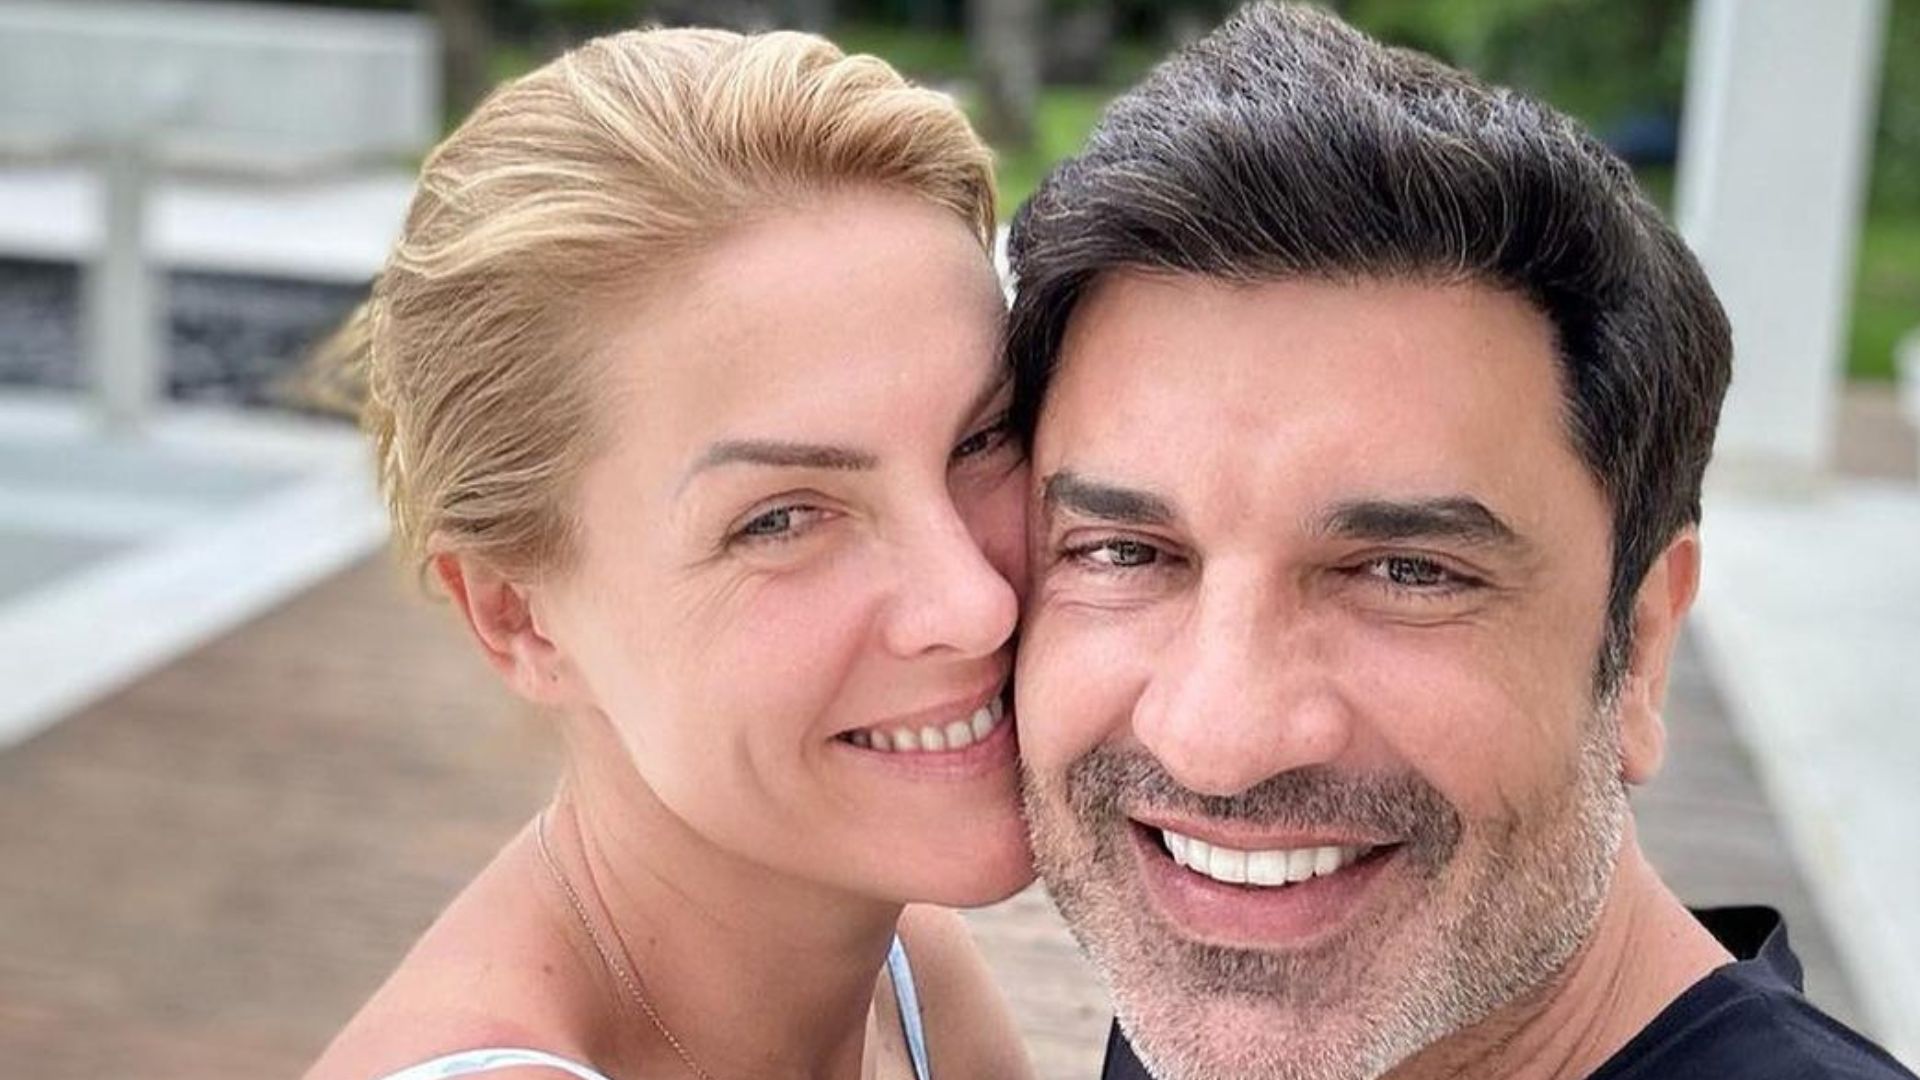 Pregnant?  Edu Guedes breaks silence about relationship with Ana Hickmann